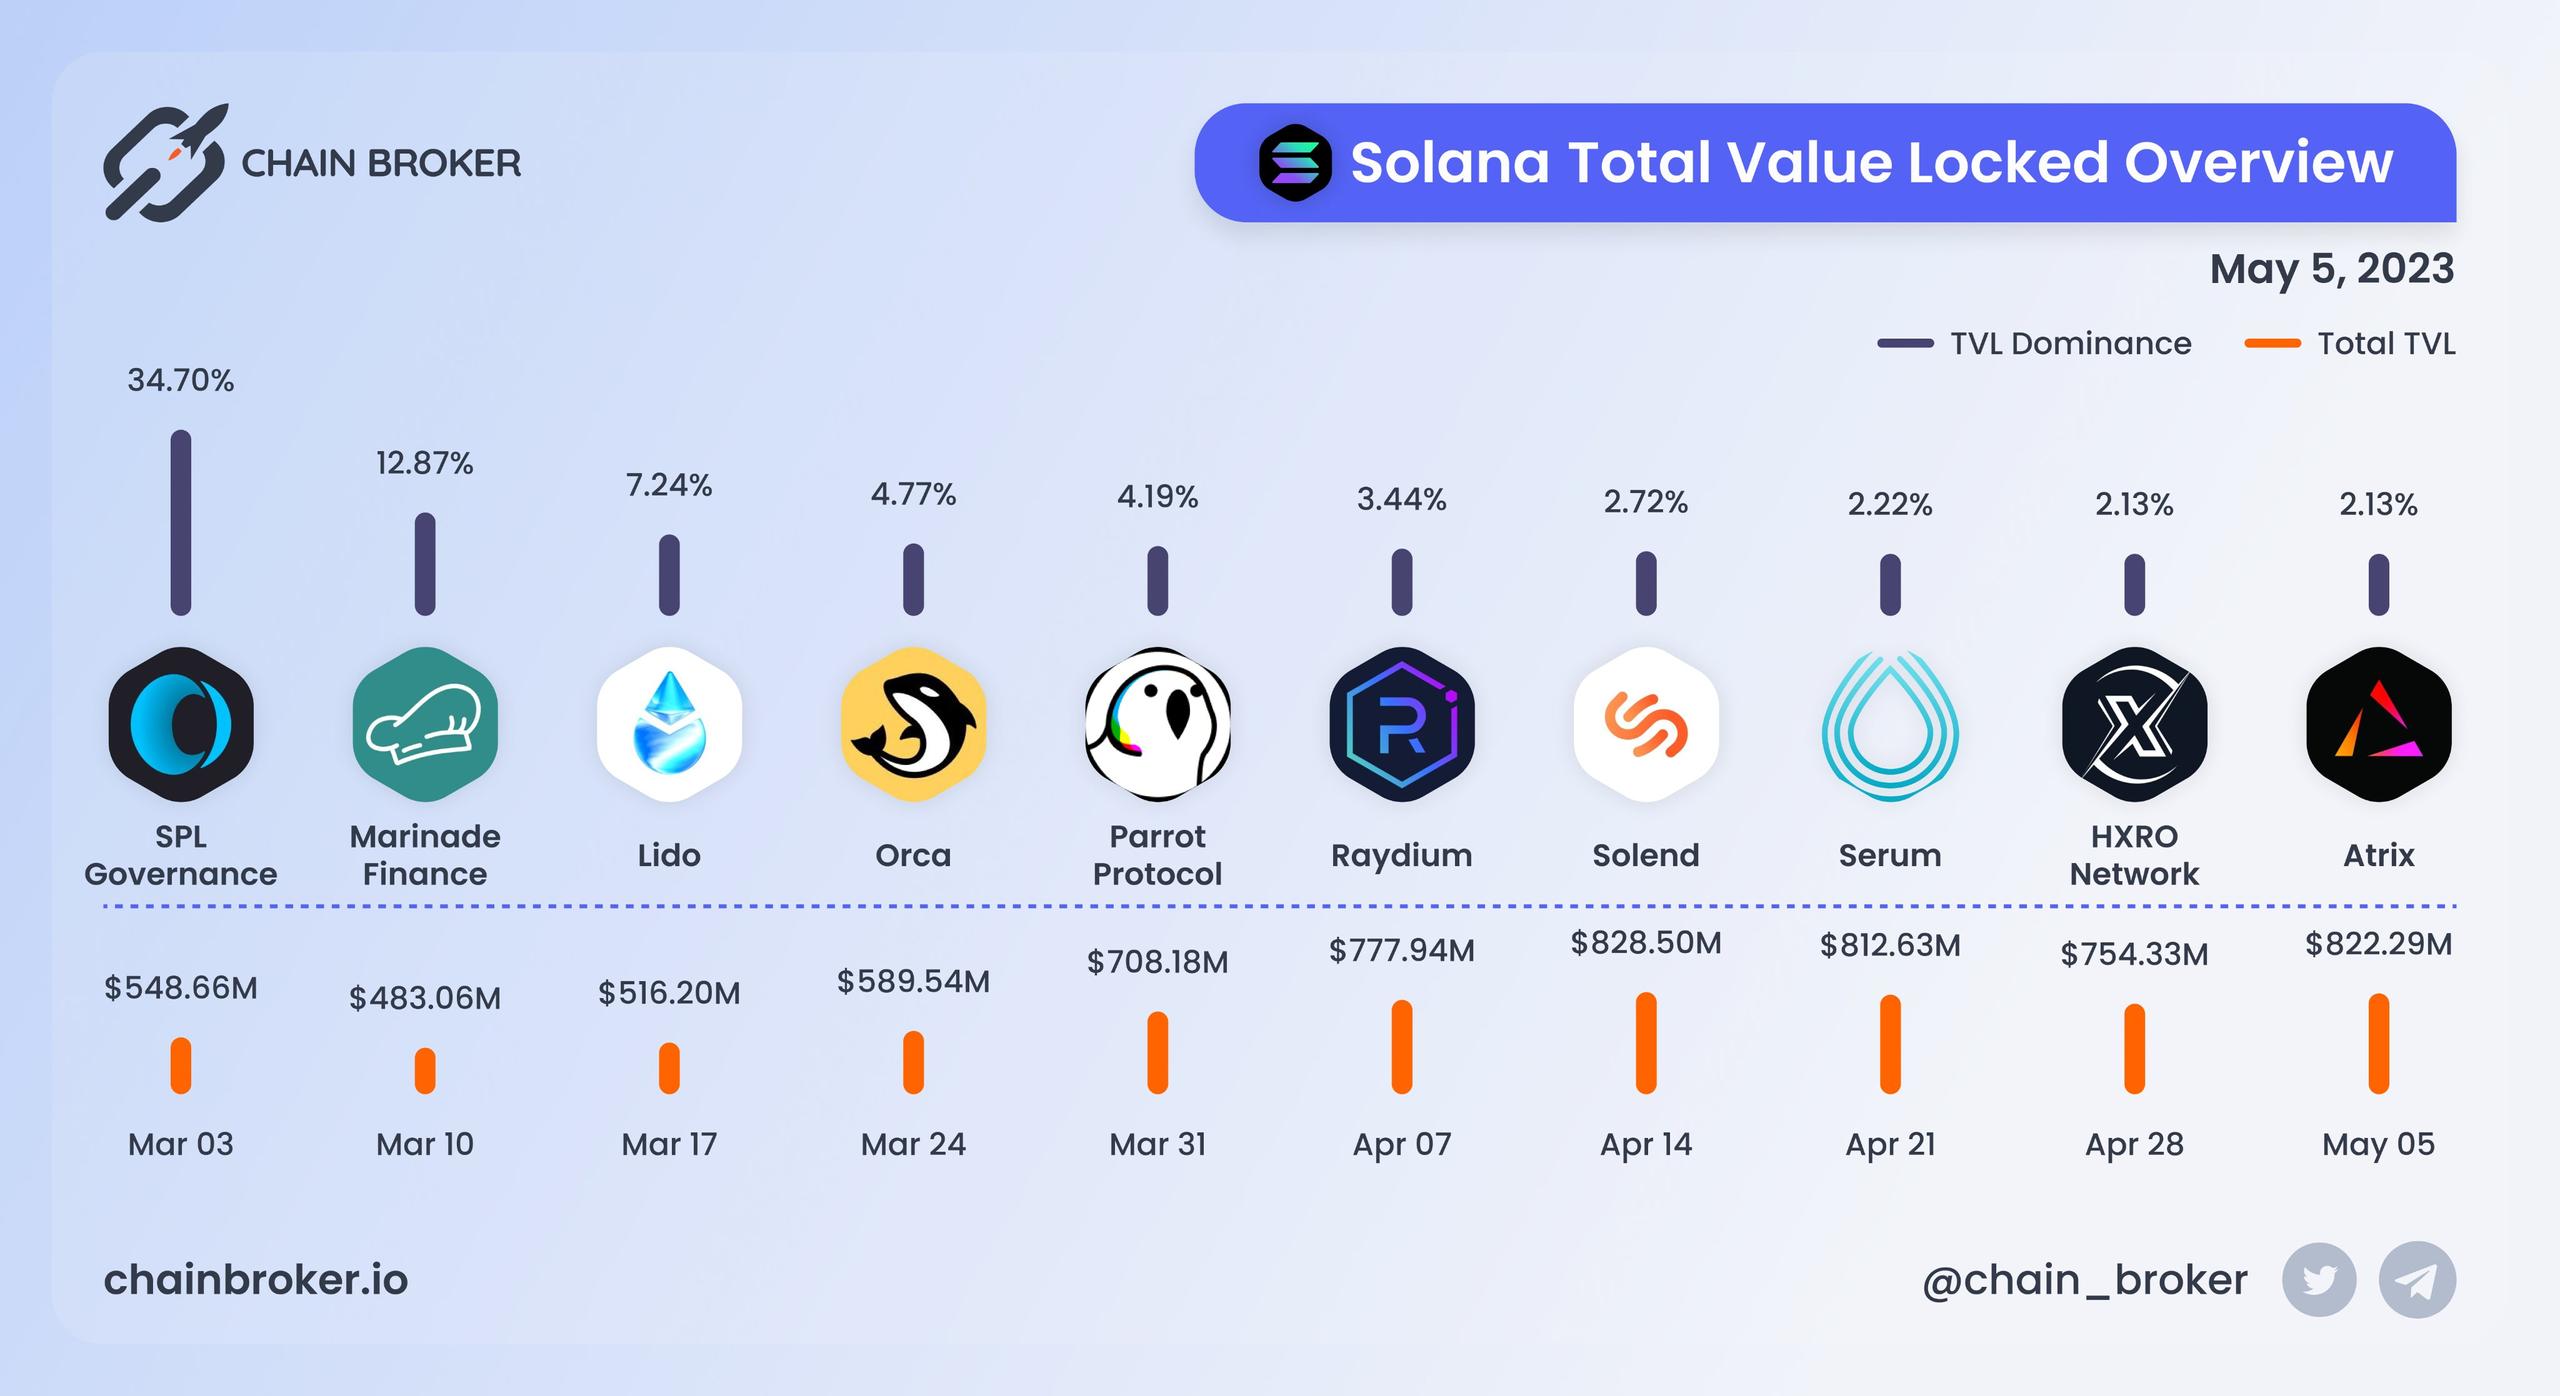 Solana total value locked overview